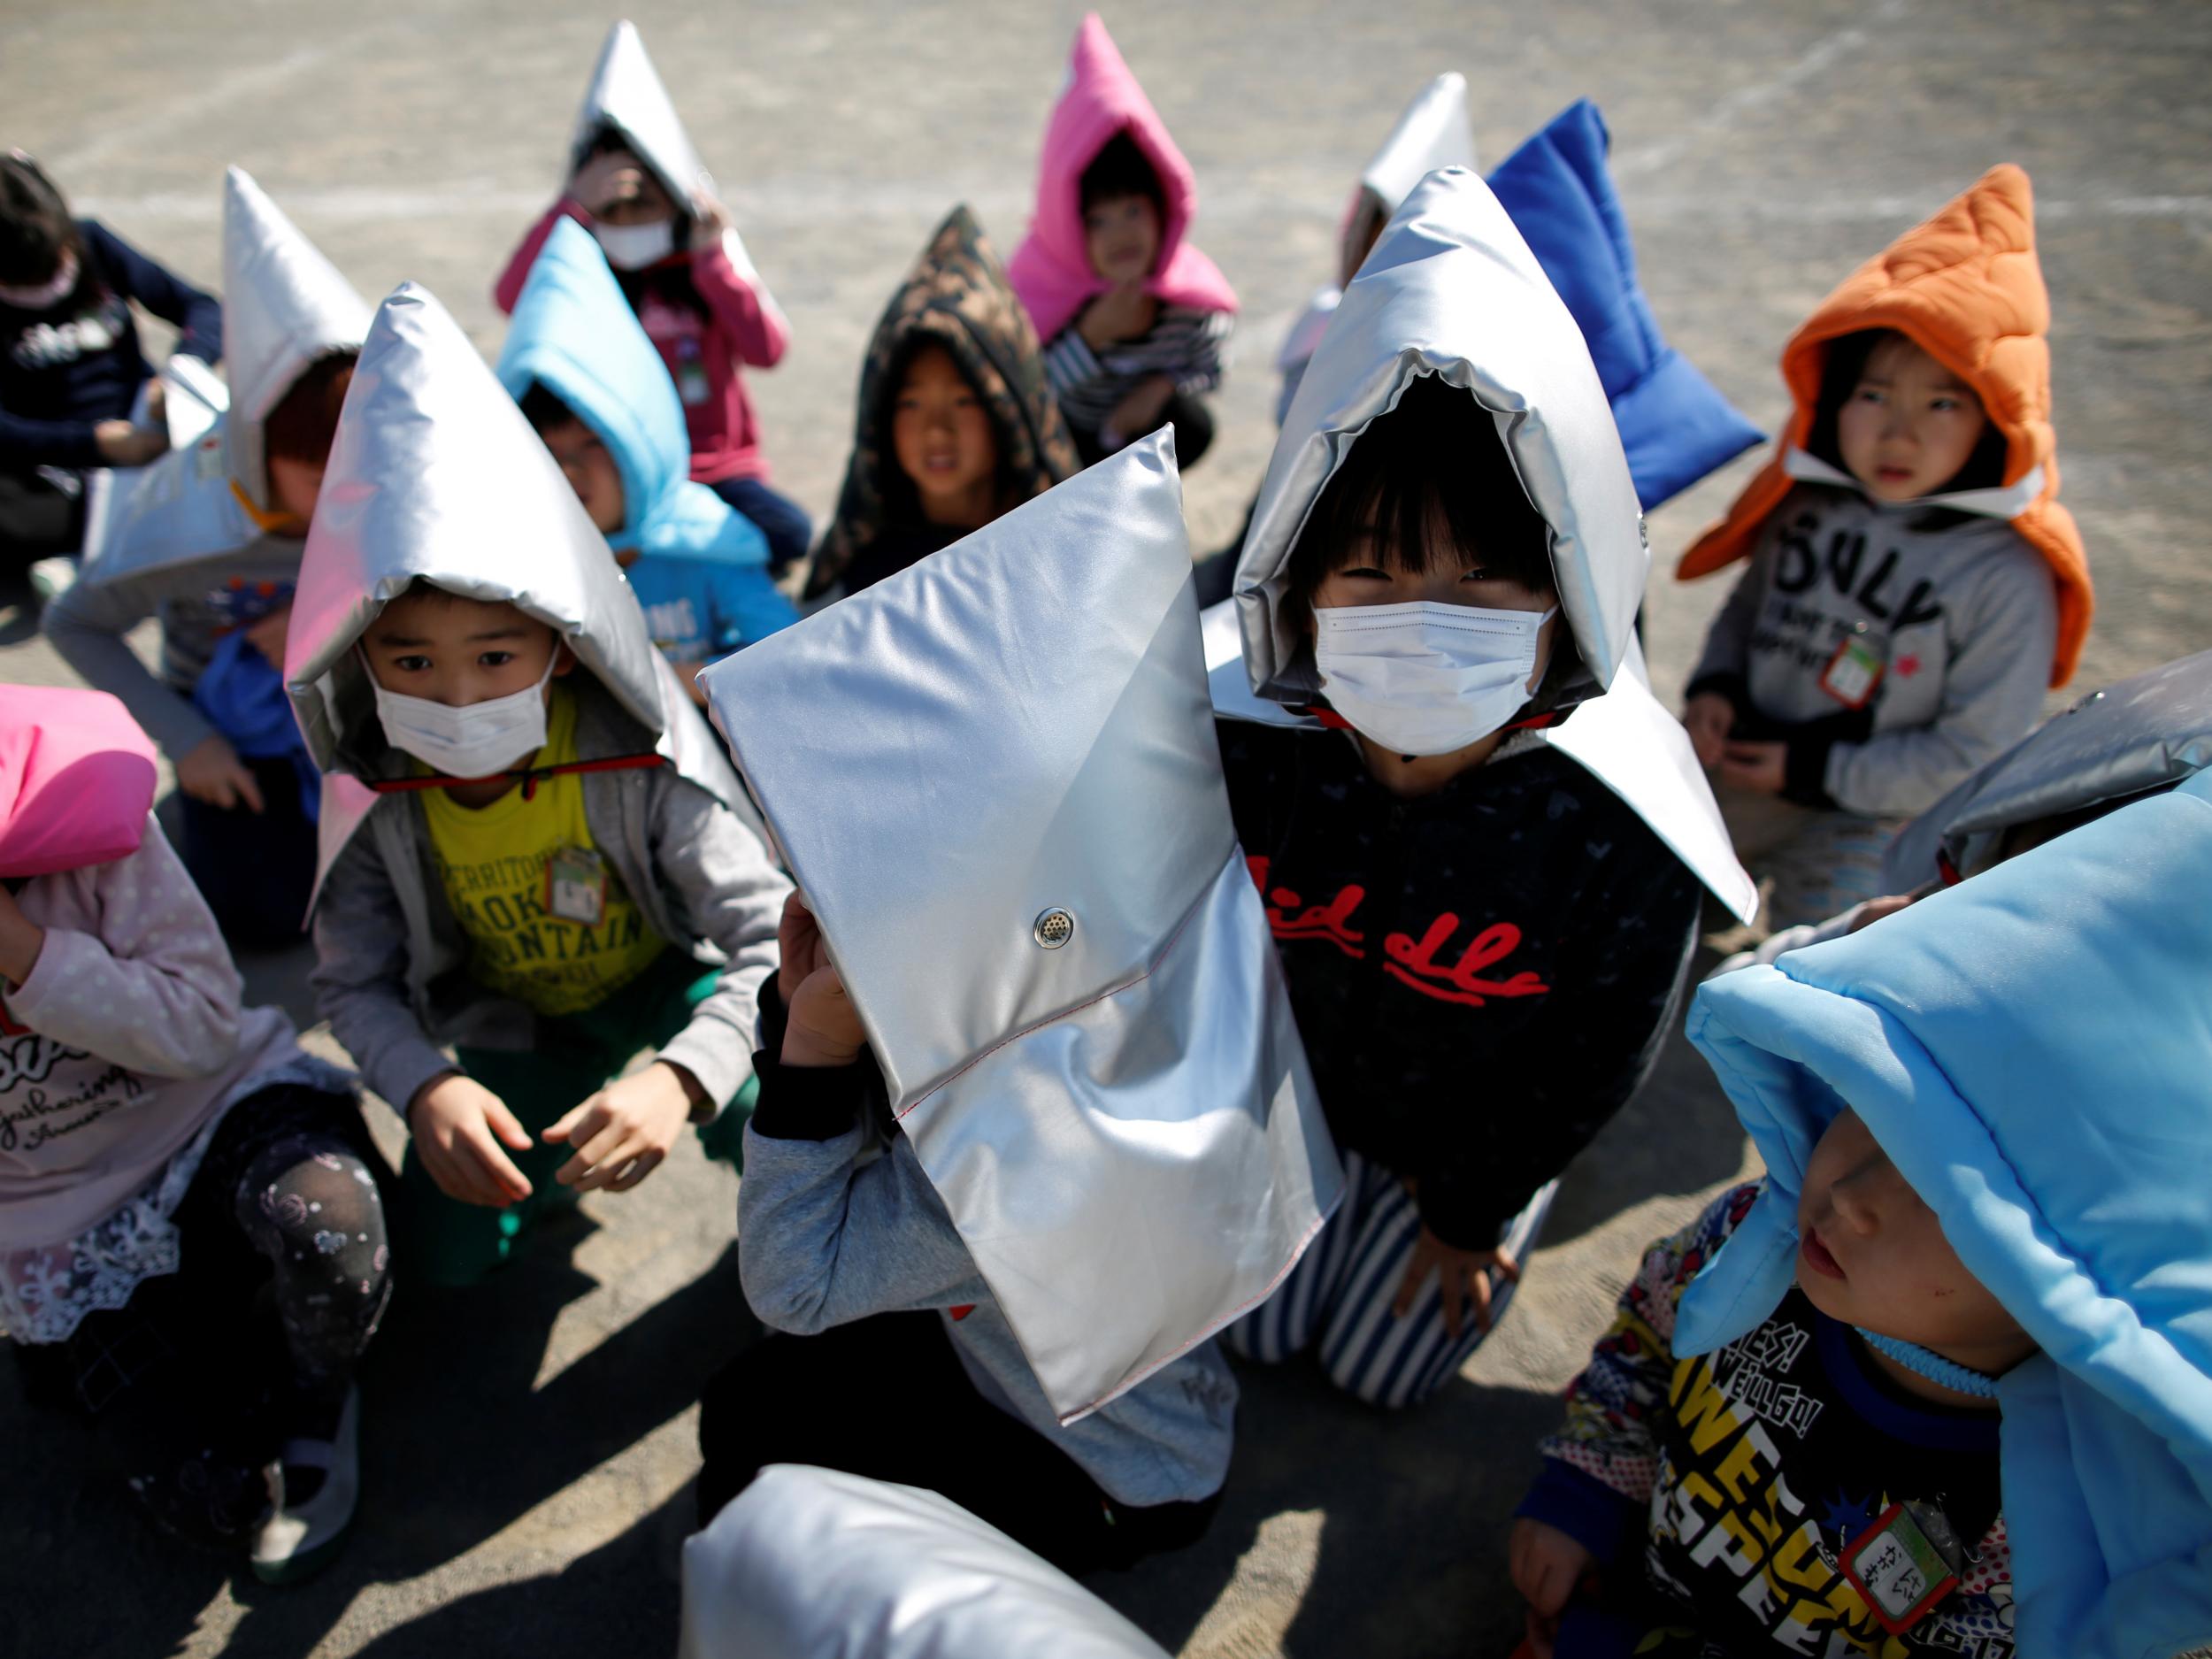 School children wearing padded hoods to protect them from falling debris take part in an earthquake simulation exercise in an annual evacuation drill at an elementary school in Tokyo